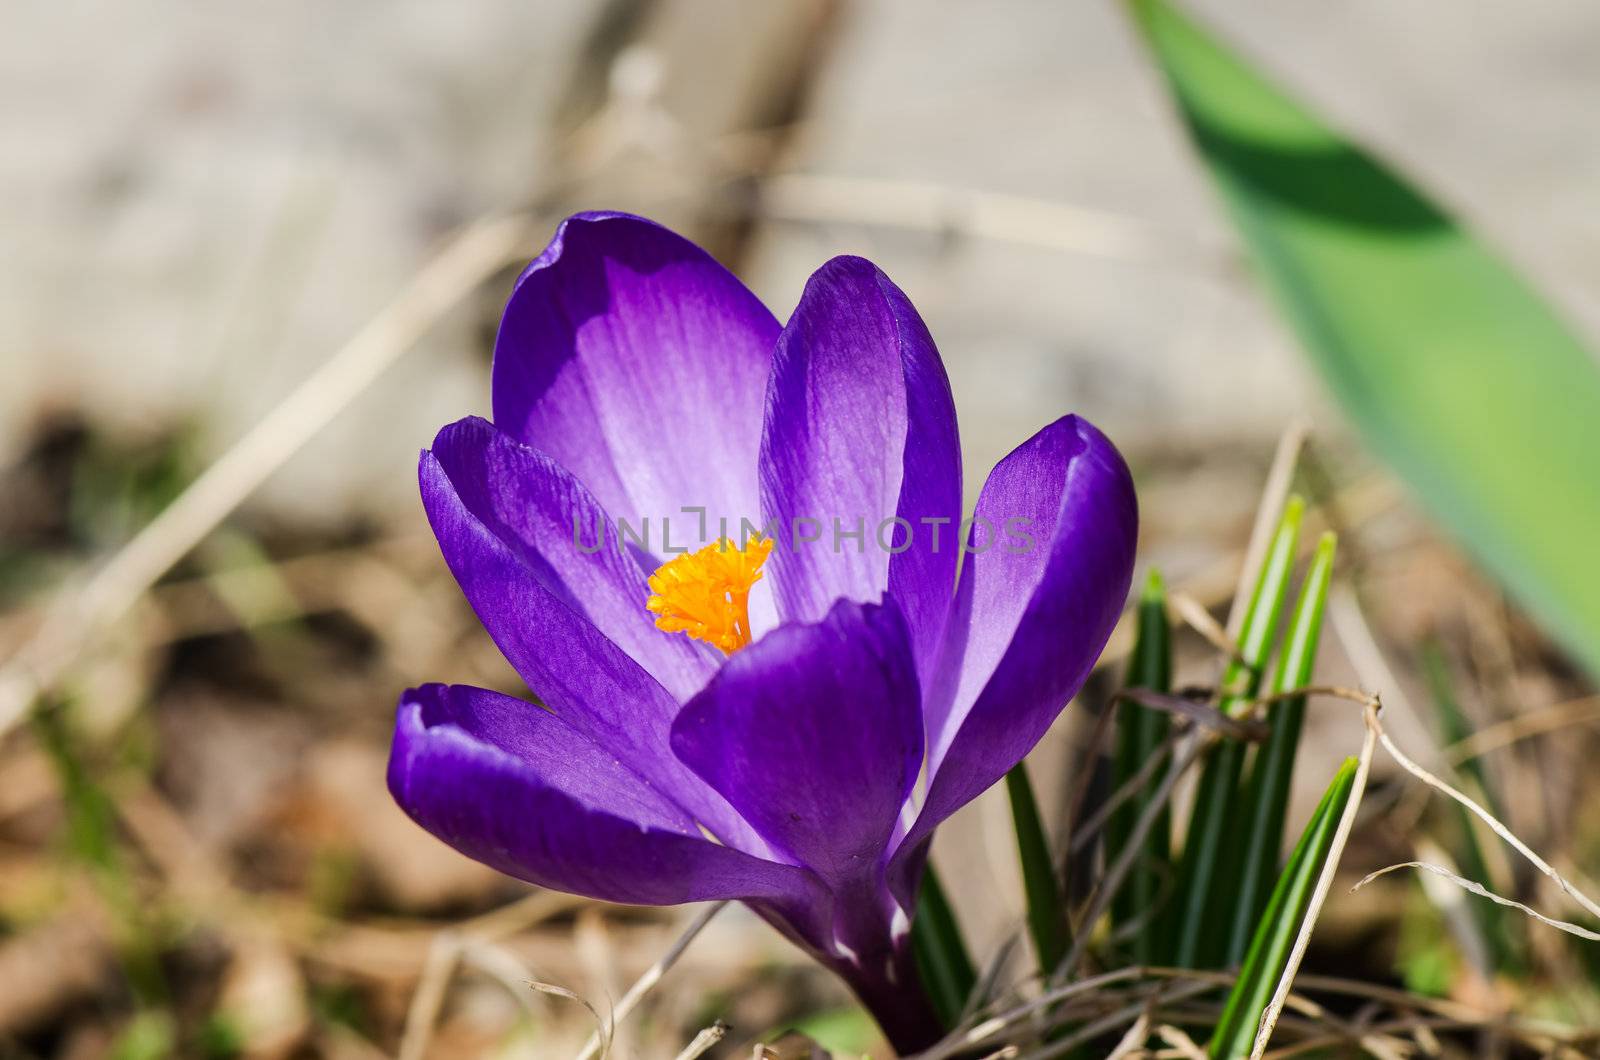 Crocus in the spring time